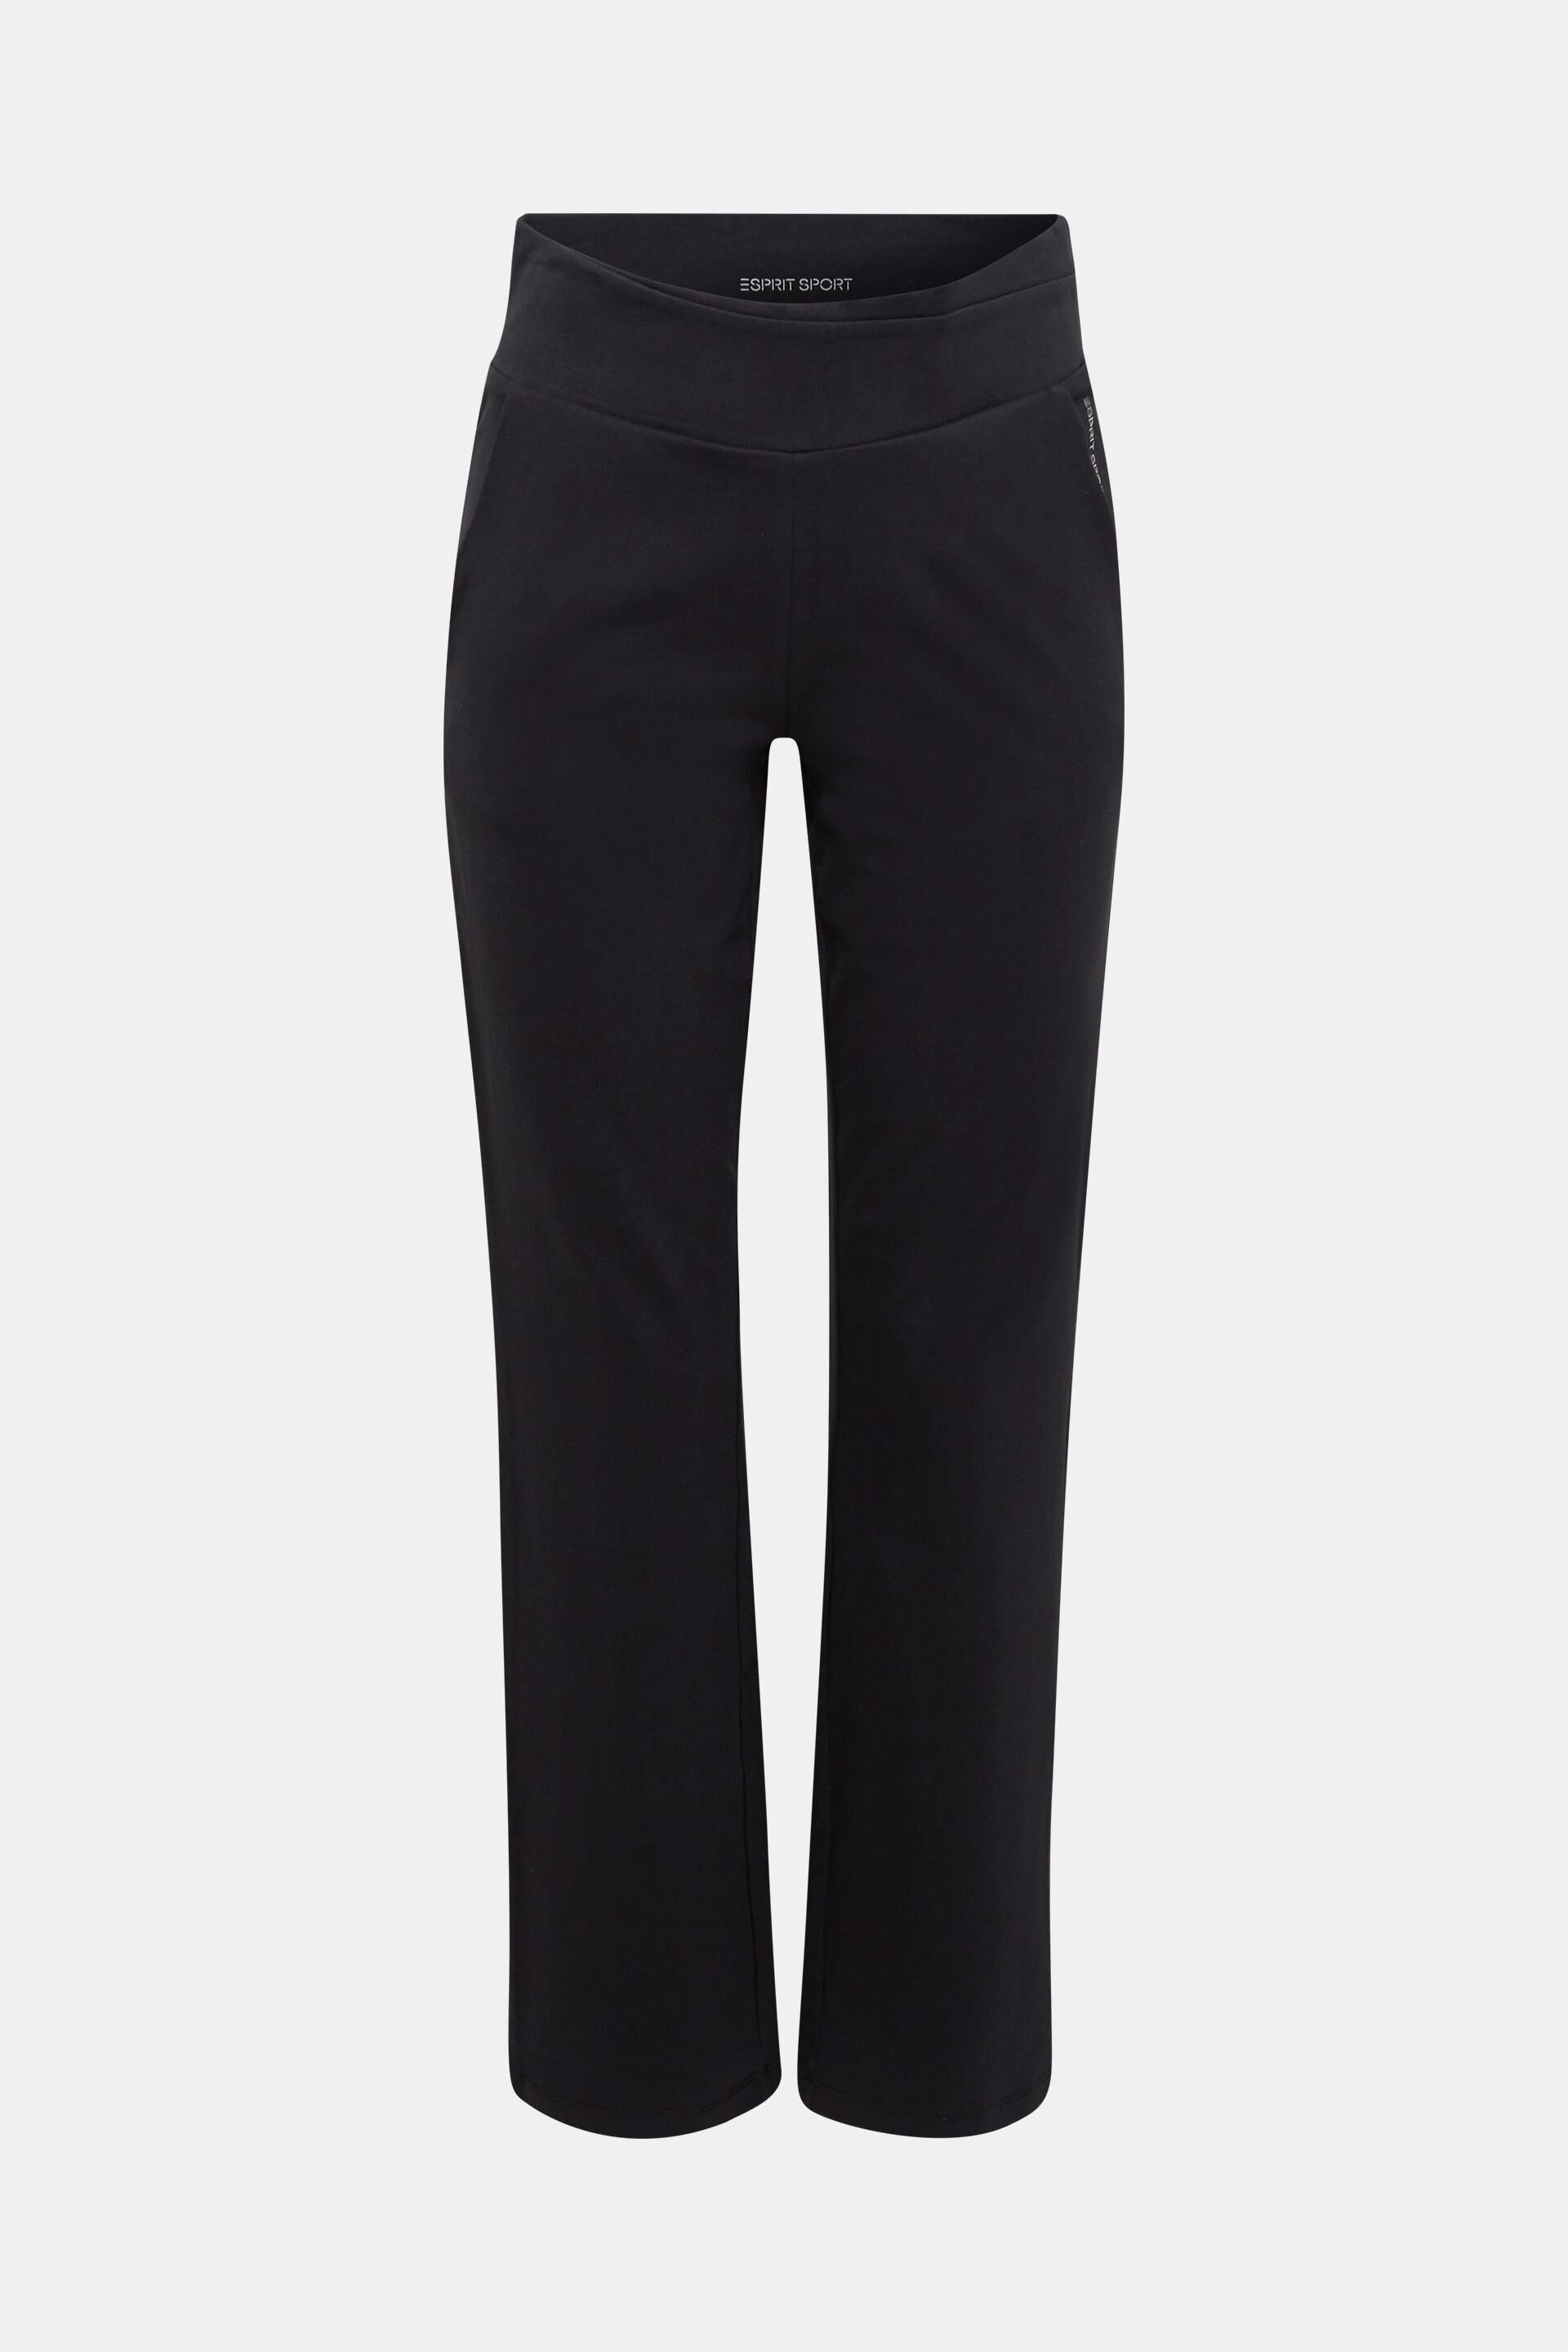 Esprit organic Jersey of cotton made trousers